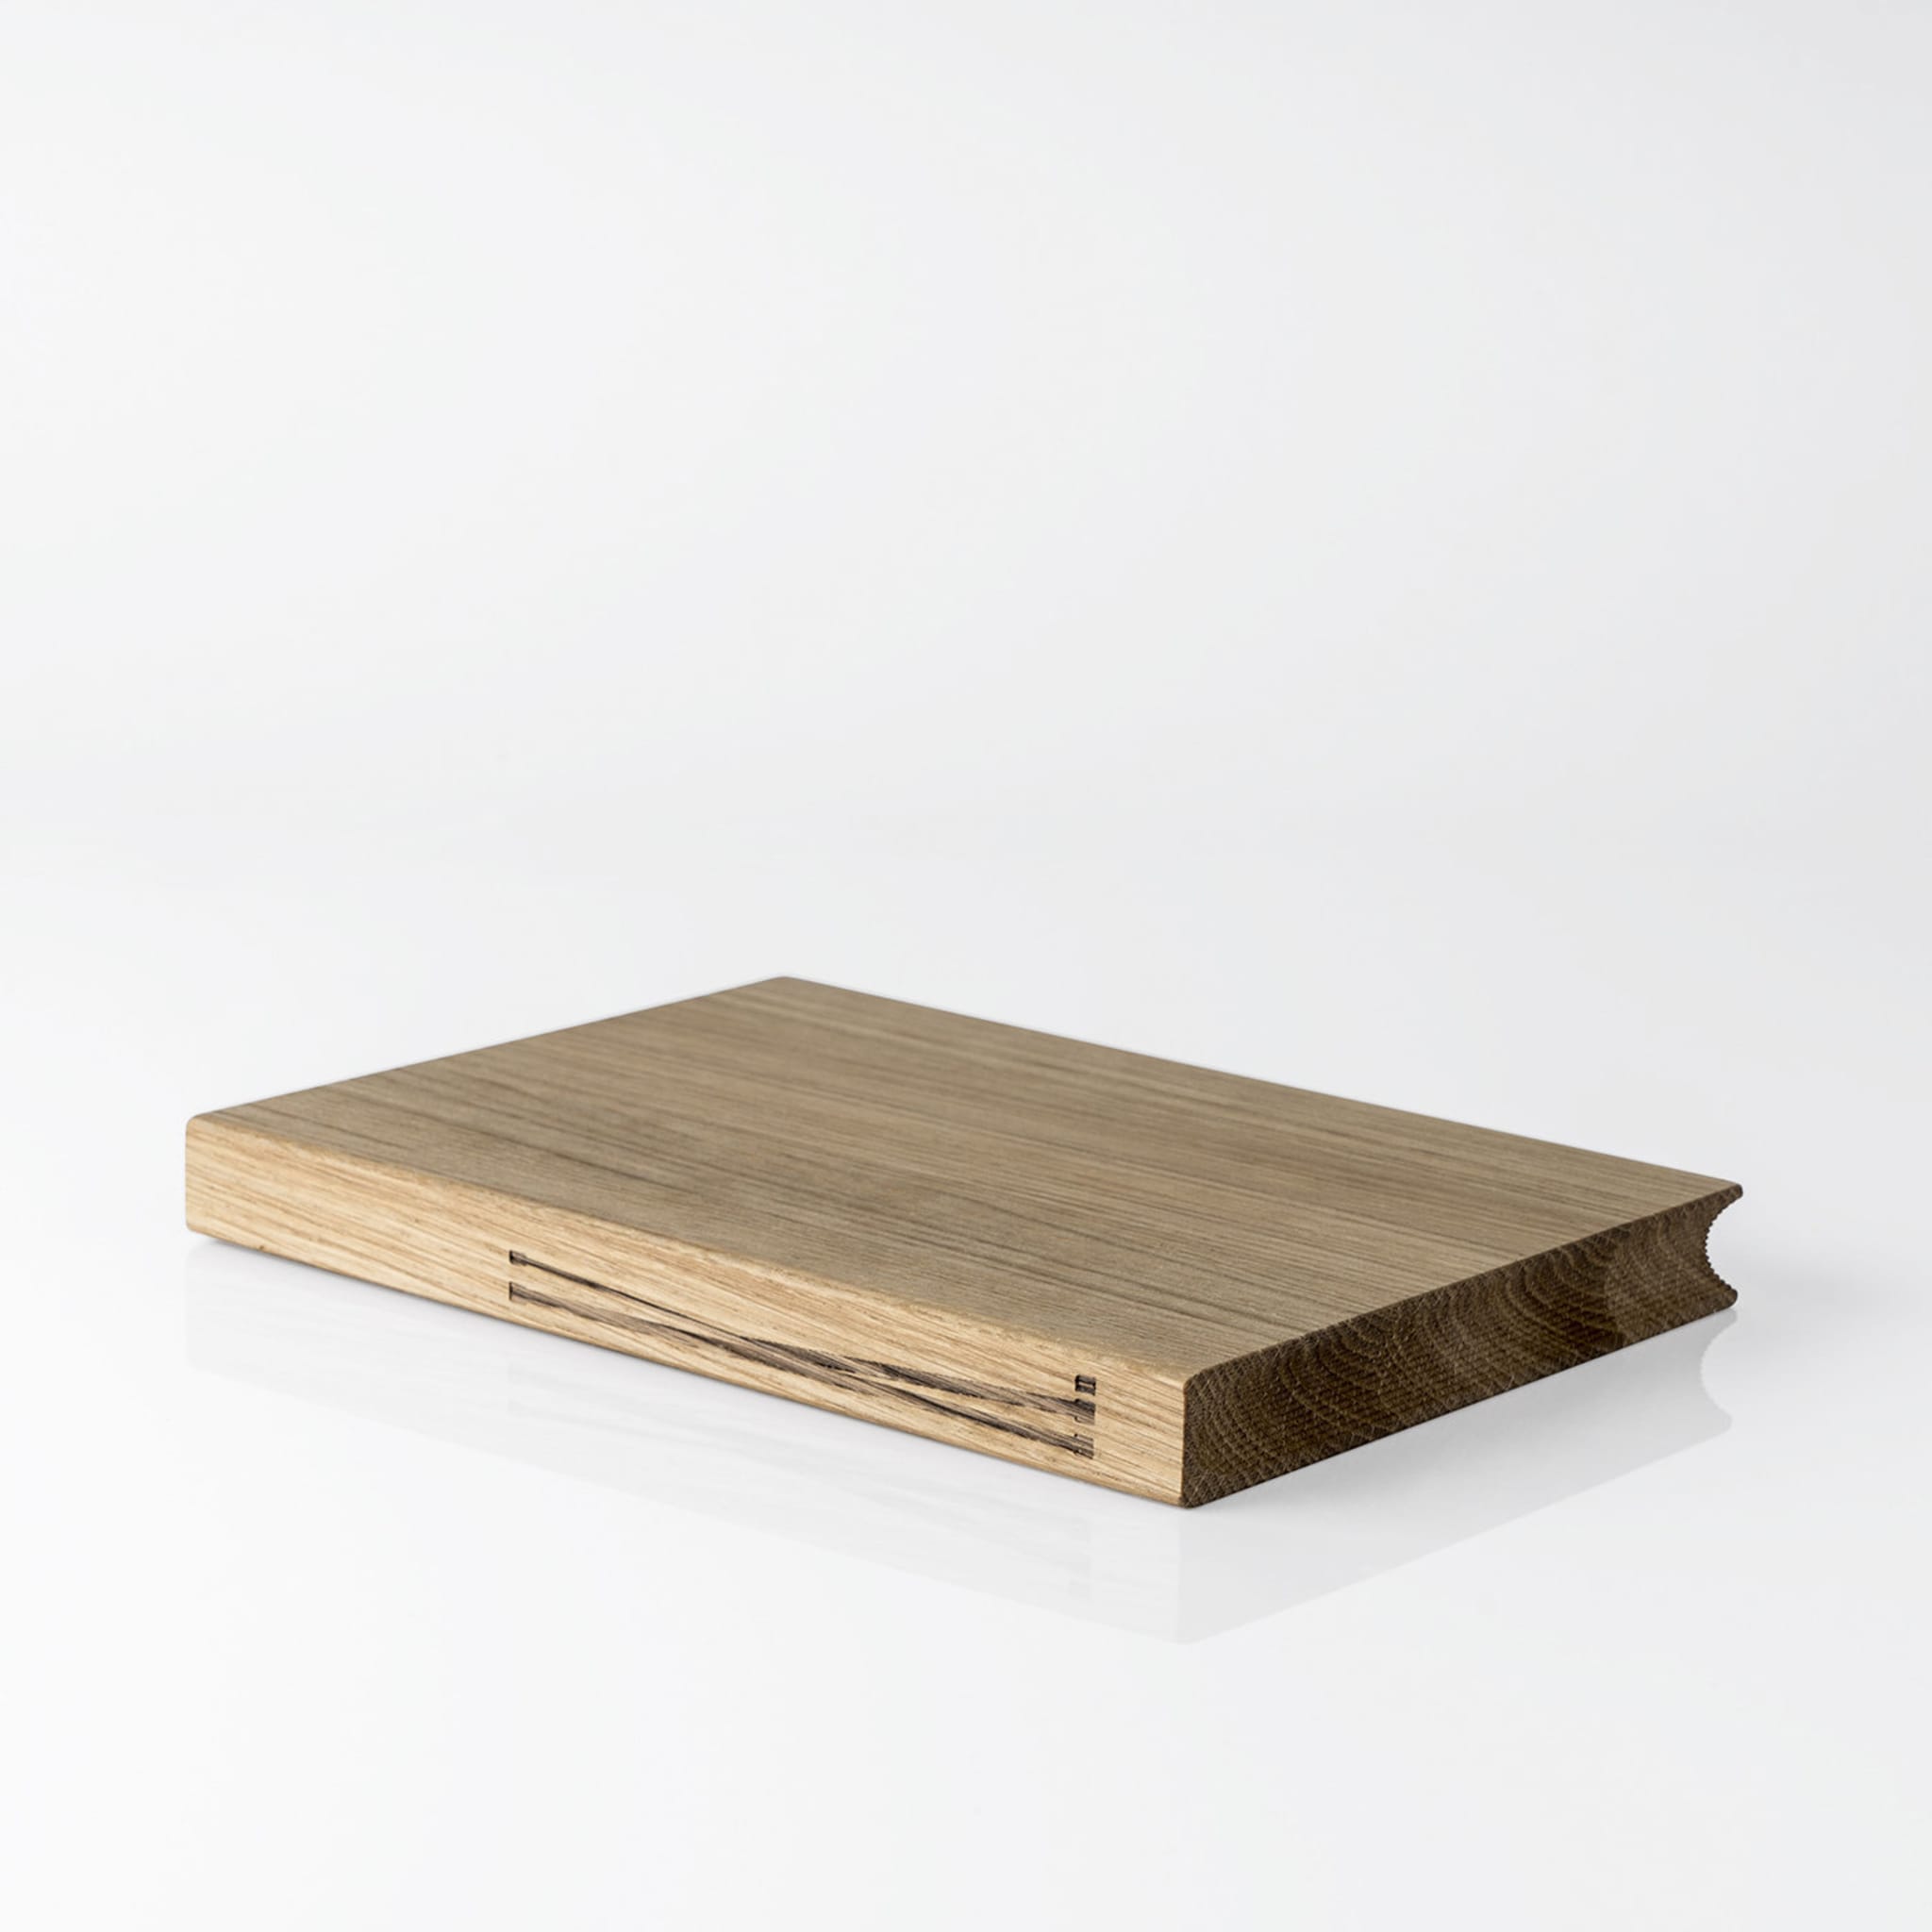 KN Book Set of 3 Cutting Boards by Roberto Vaia - Alternative view 2